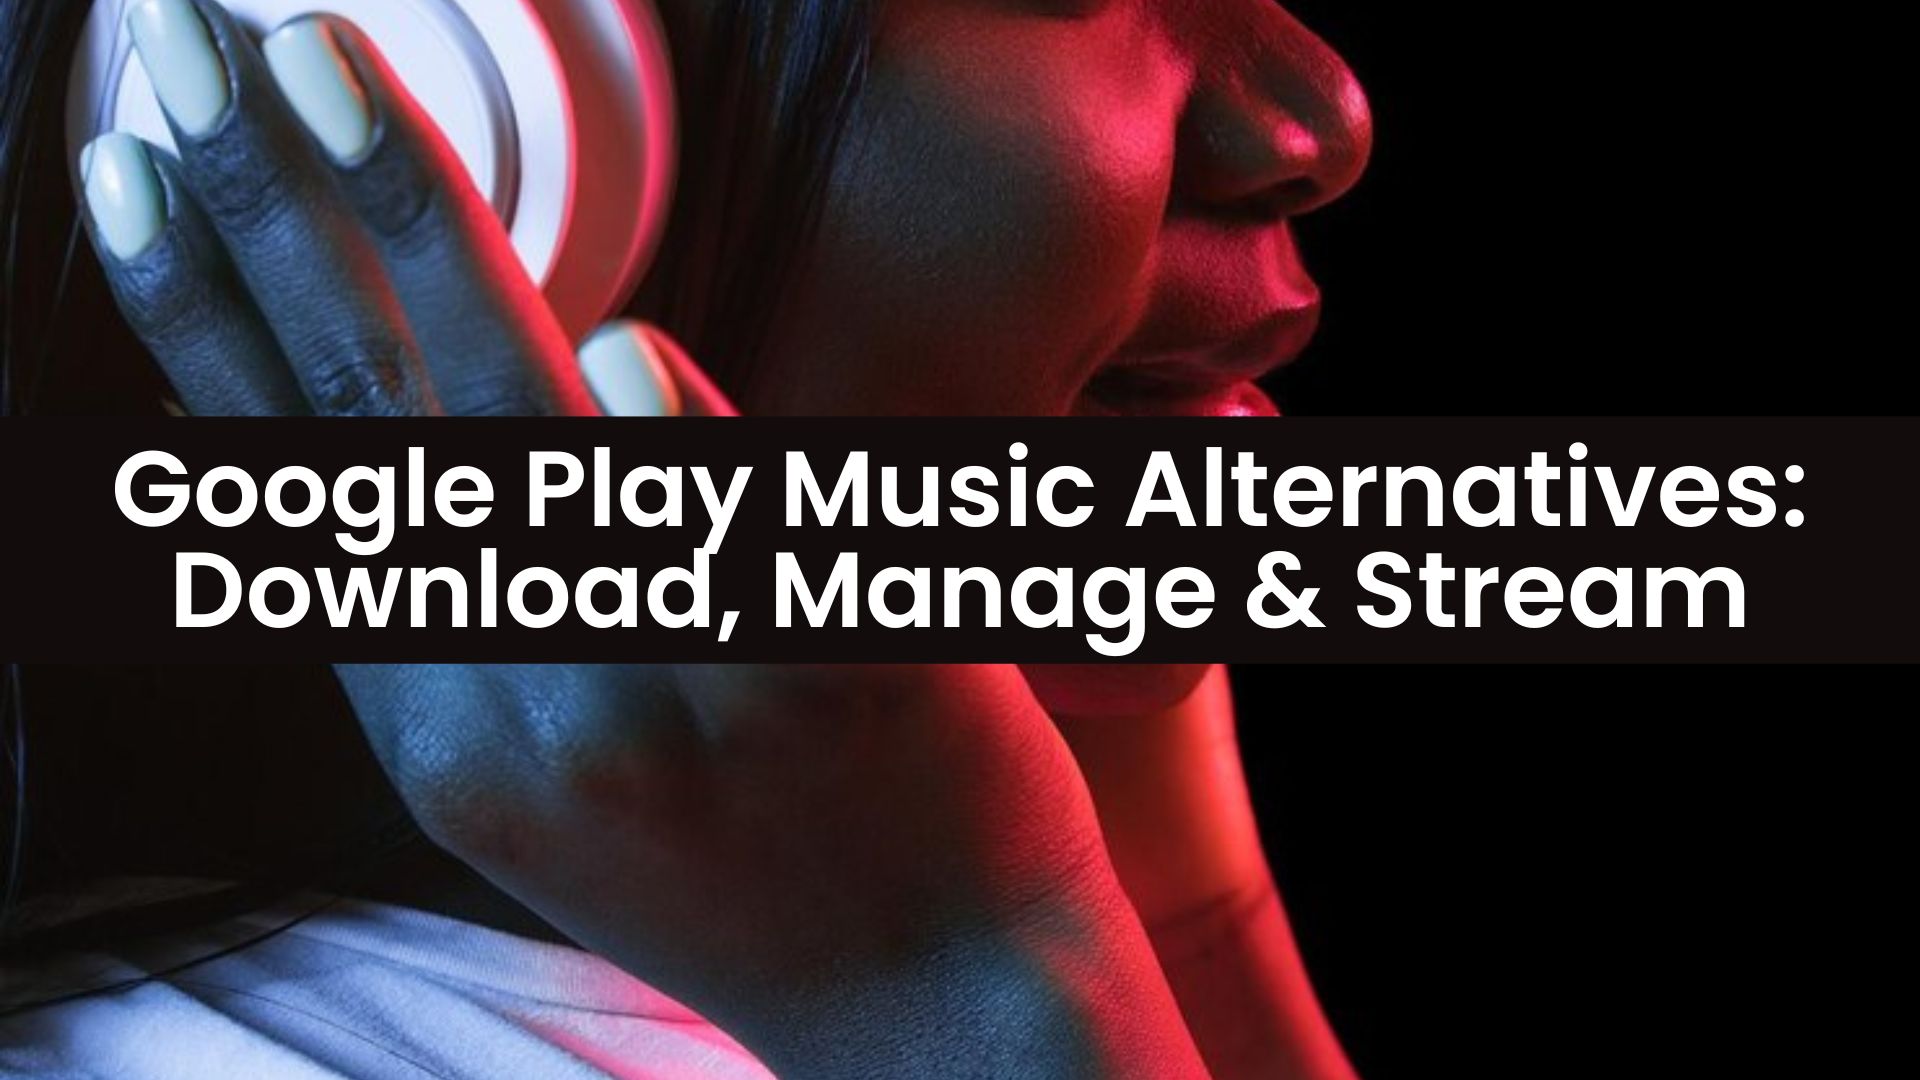 Check out: Google play music alternative | Google play music manager | Google play music download | Google play music on iPhone | Google play